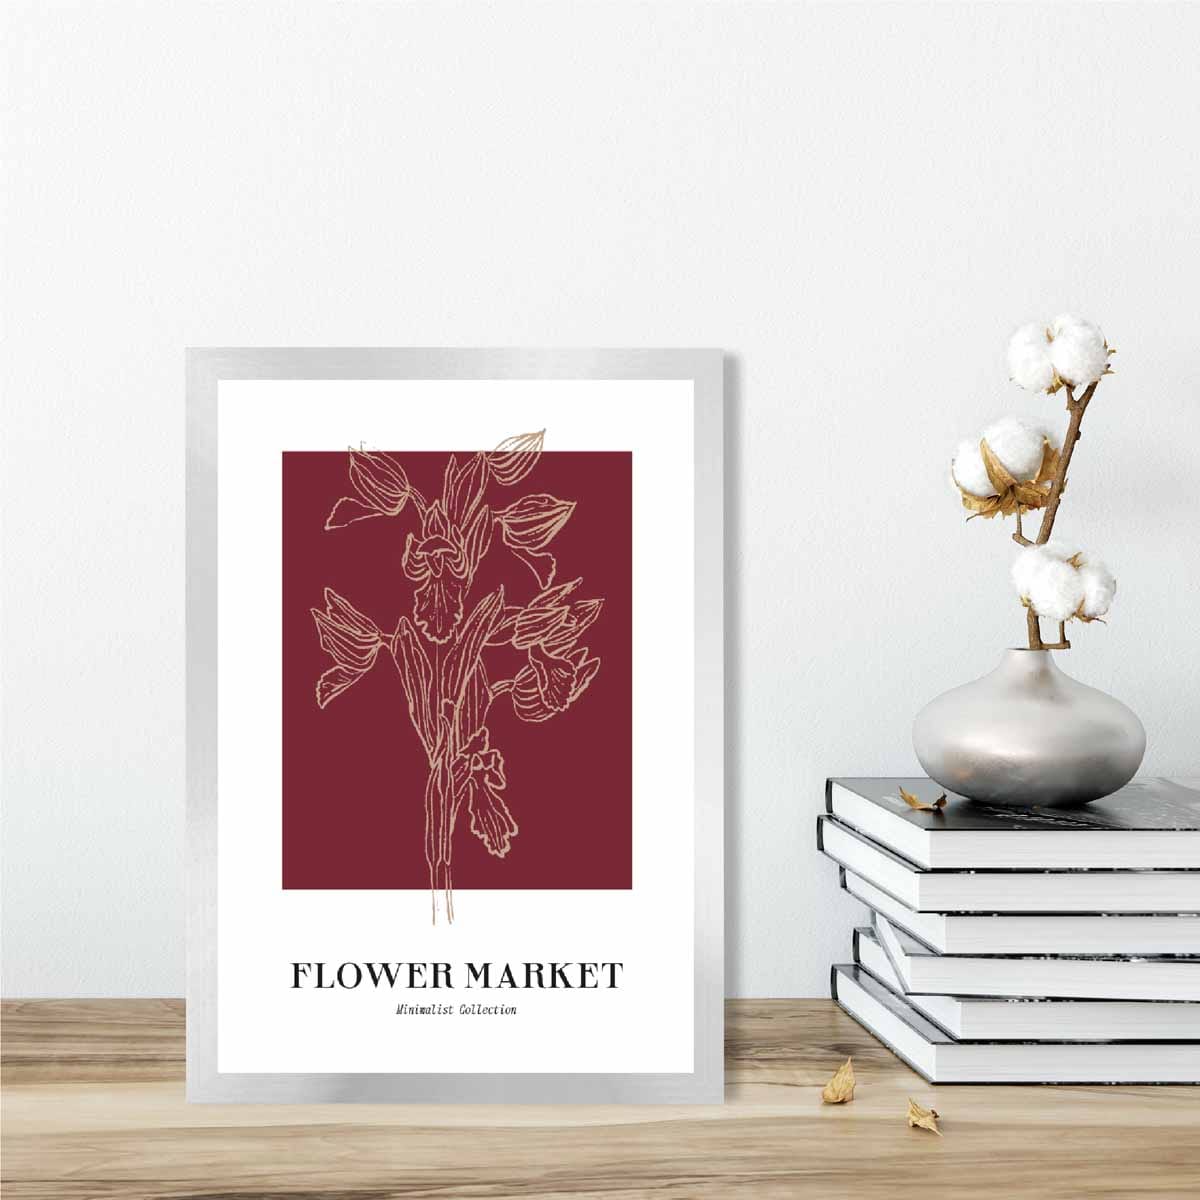 Flower Market Minimalist Poster Collection No 2 in Red